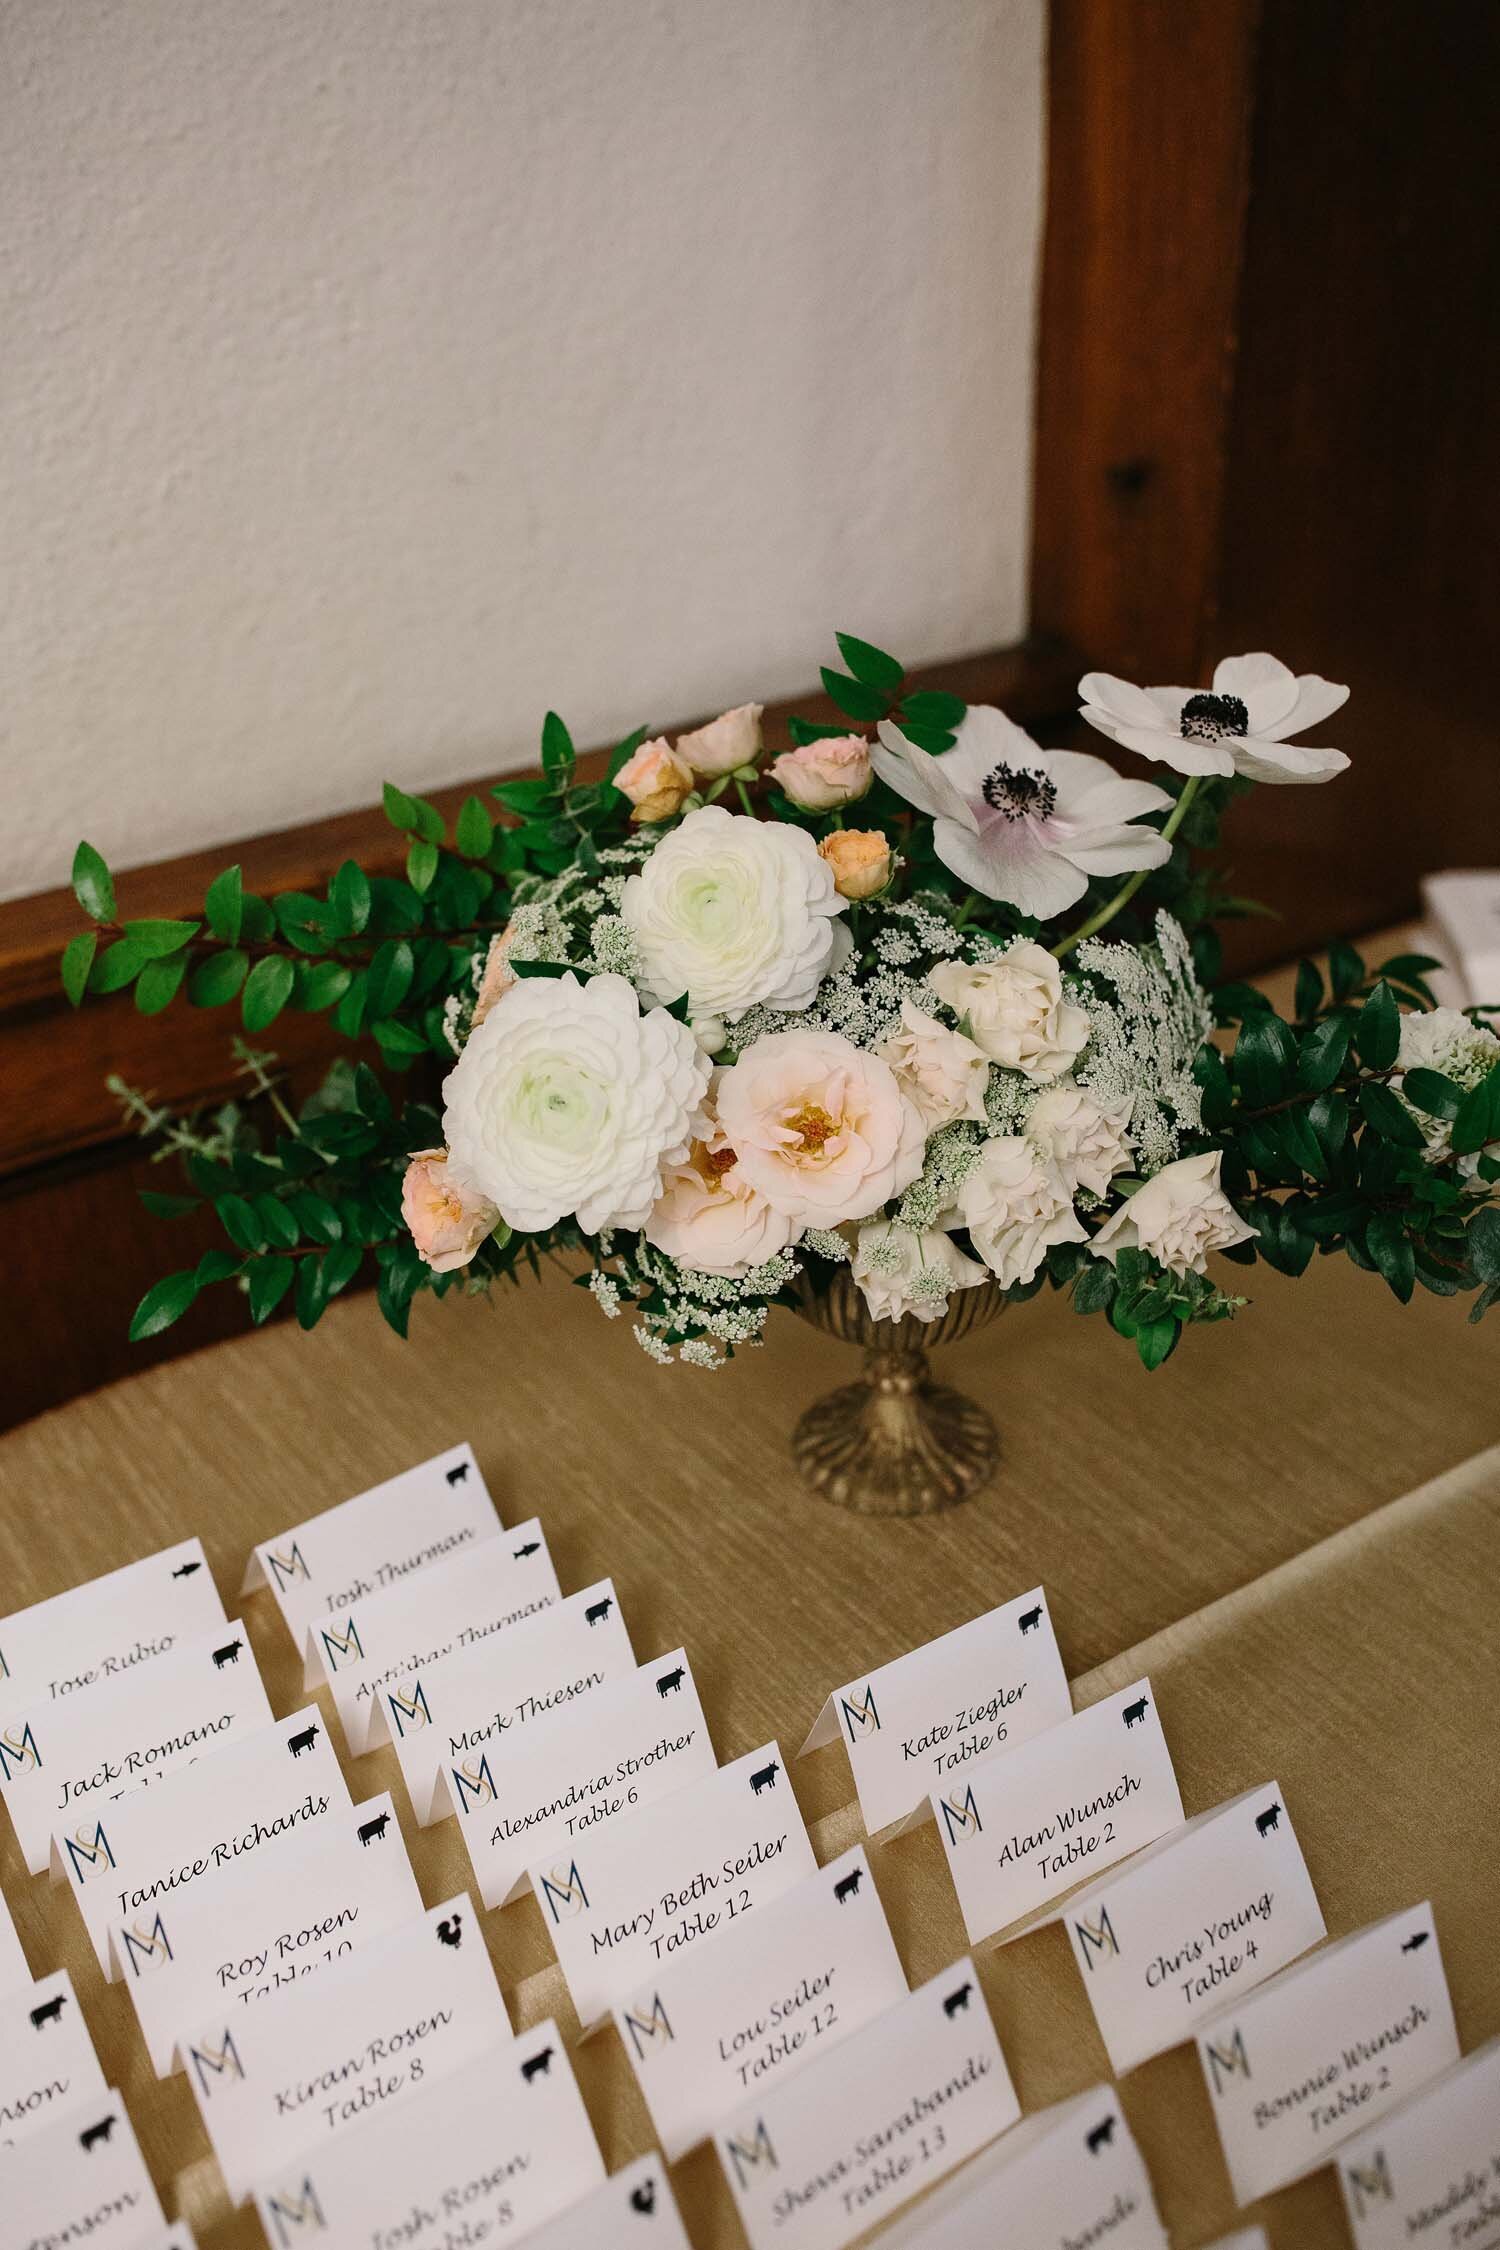 Welcome table flowers